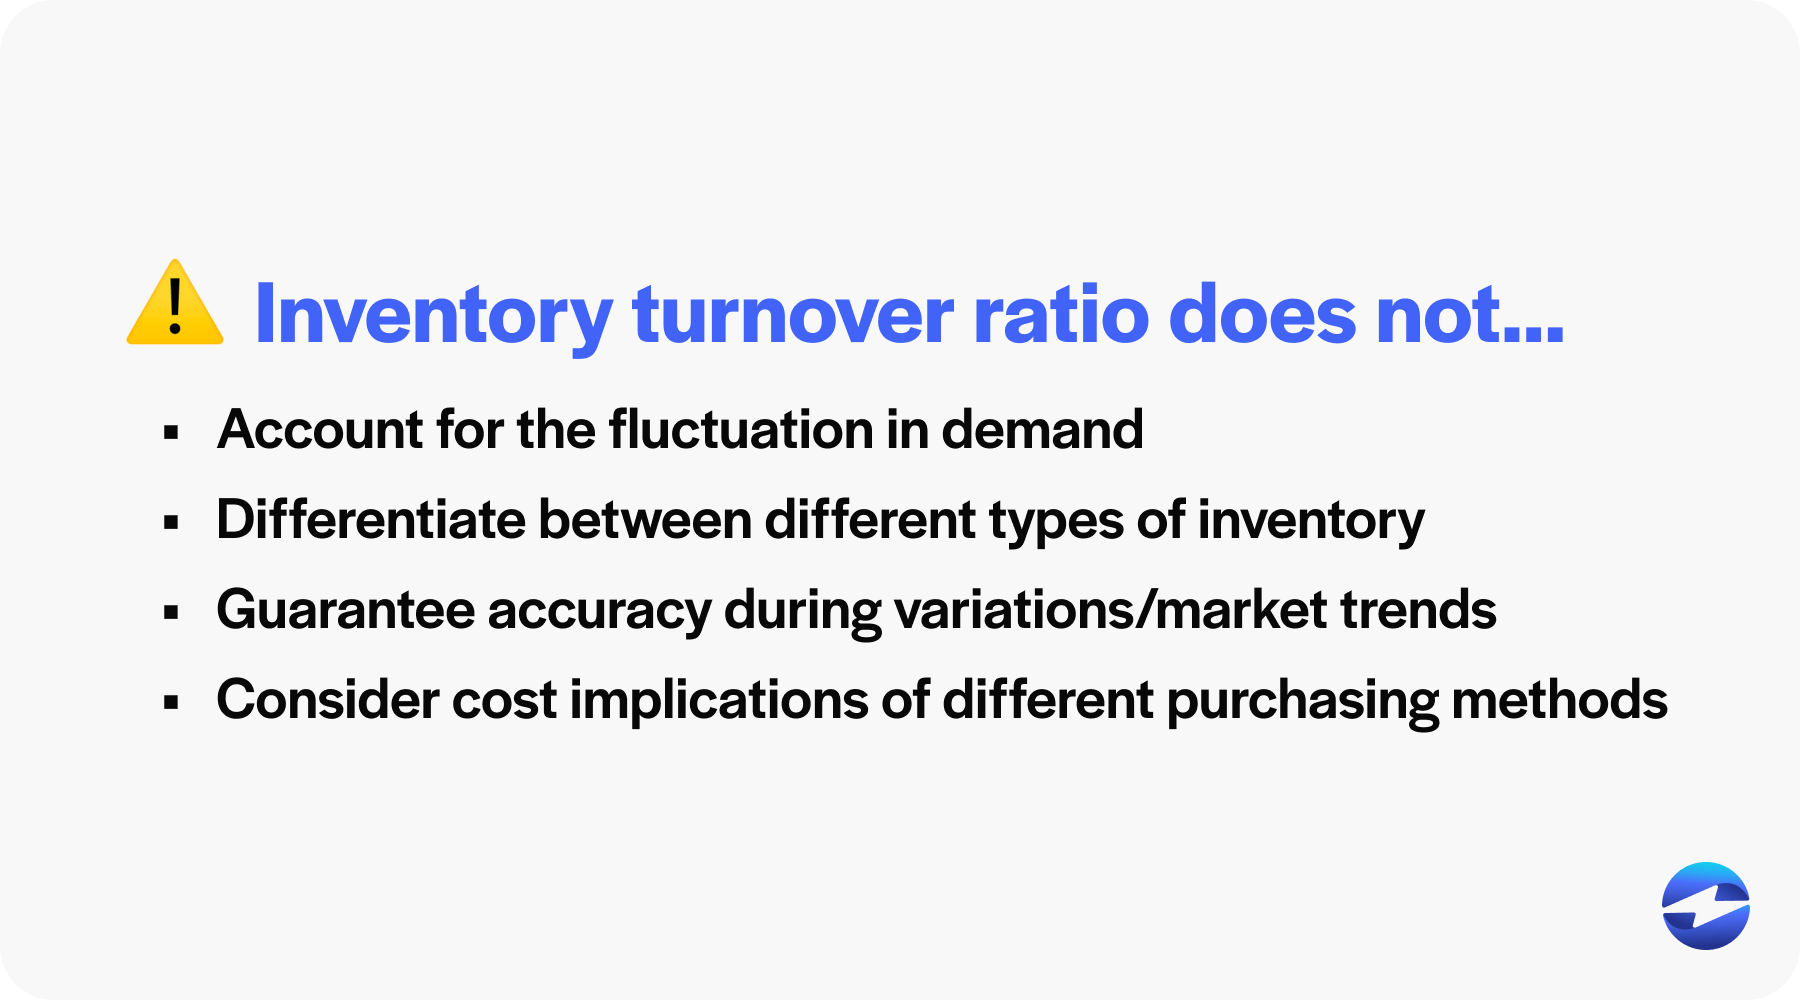 Inventory turnover ratio does not